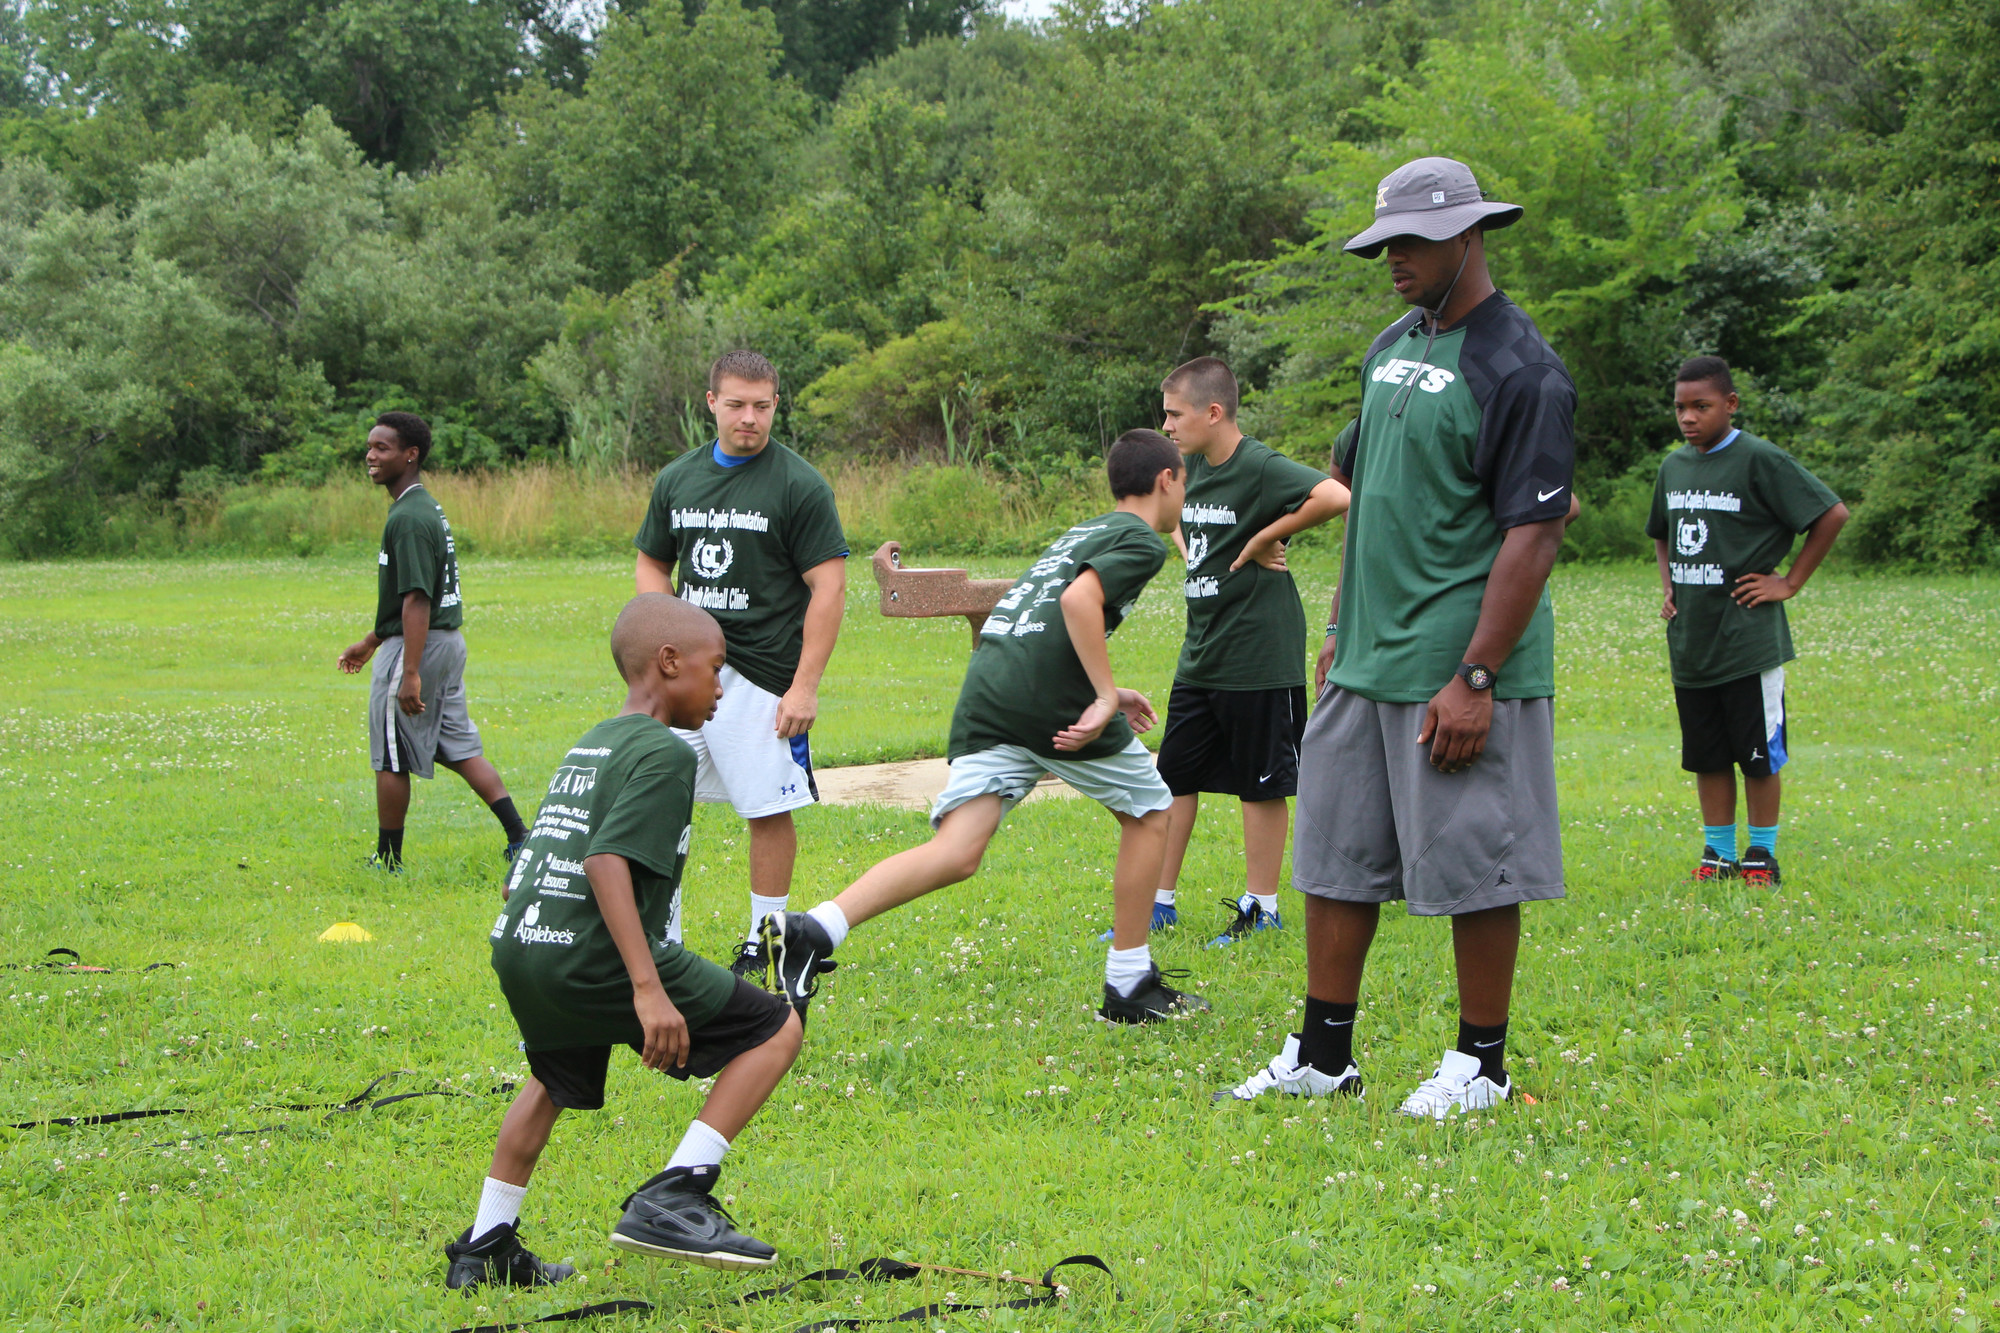 New York Jets defensive end Quinton Coples instructed local youth football players at a clinic on July 15 at Baldwin Park that benefited his foundation, which helps children in need.